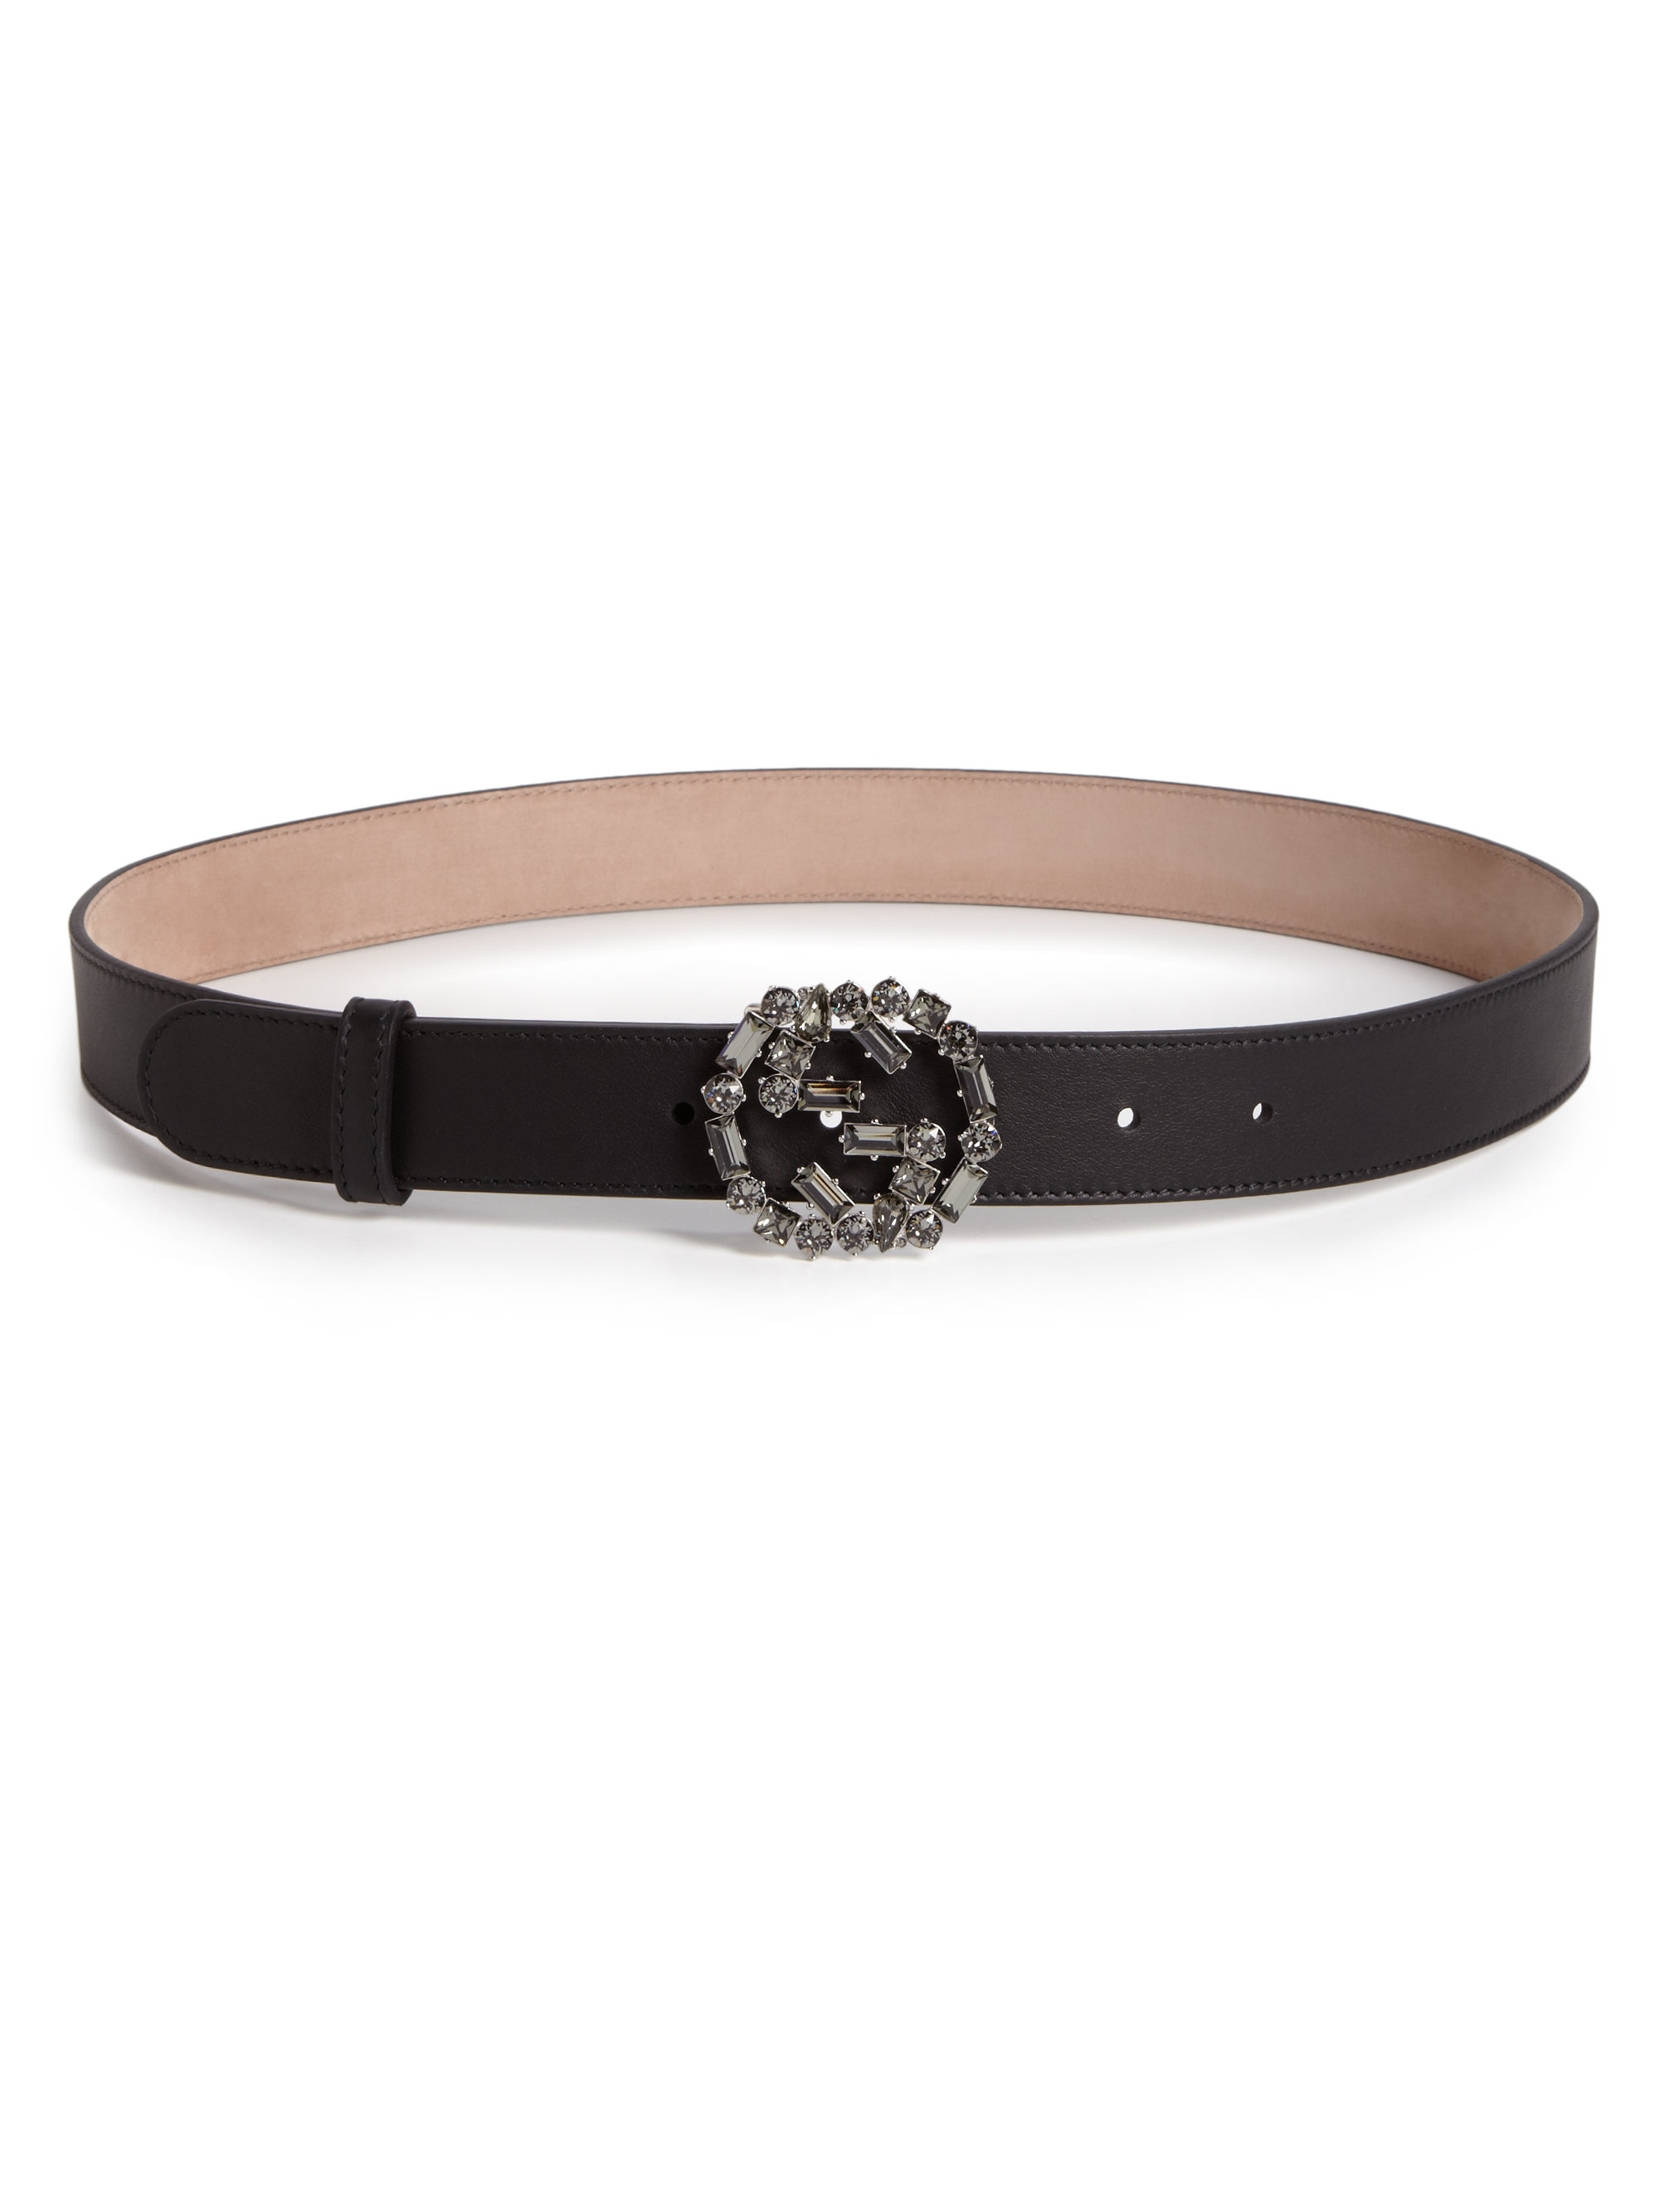 Lyst - Gucci Moon Crystal Leather Belt in Black